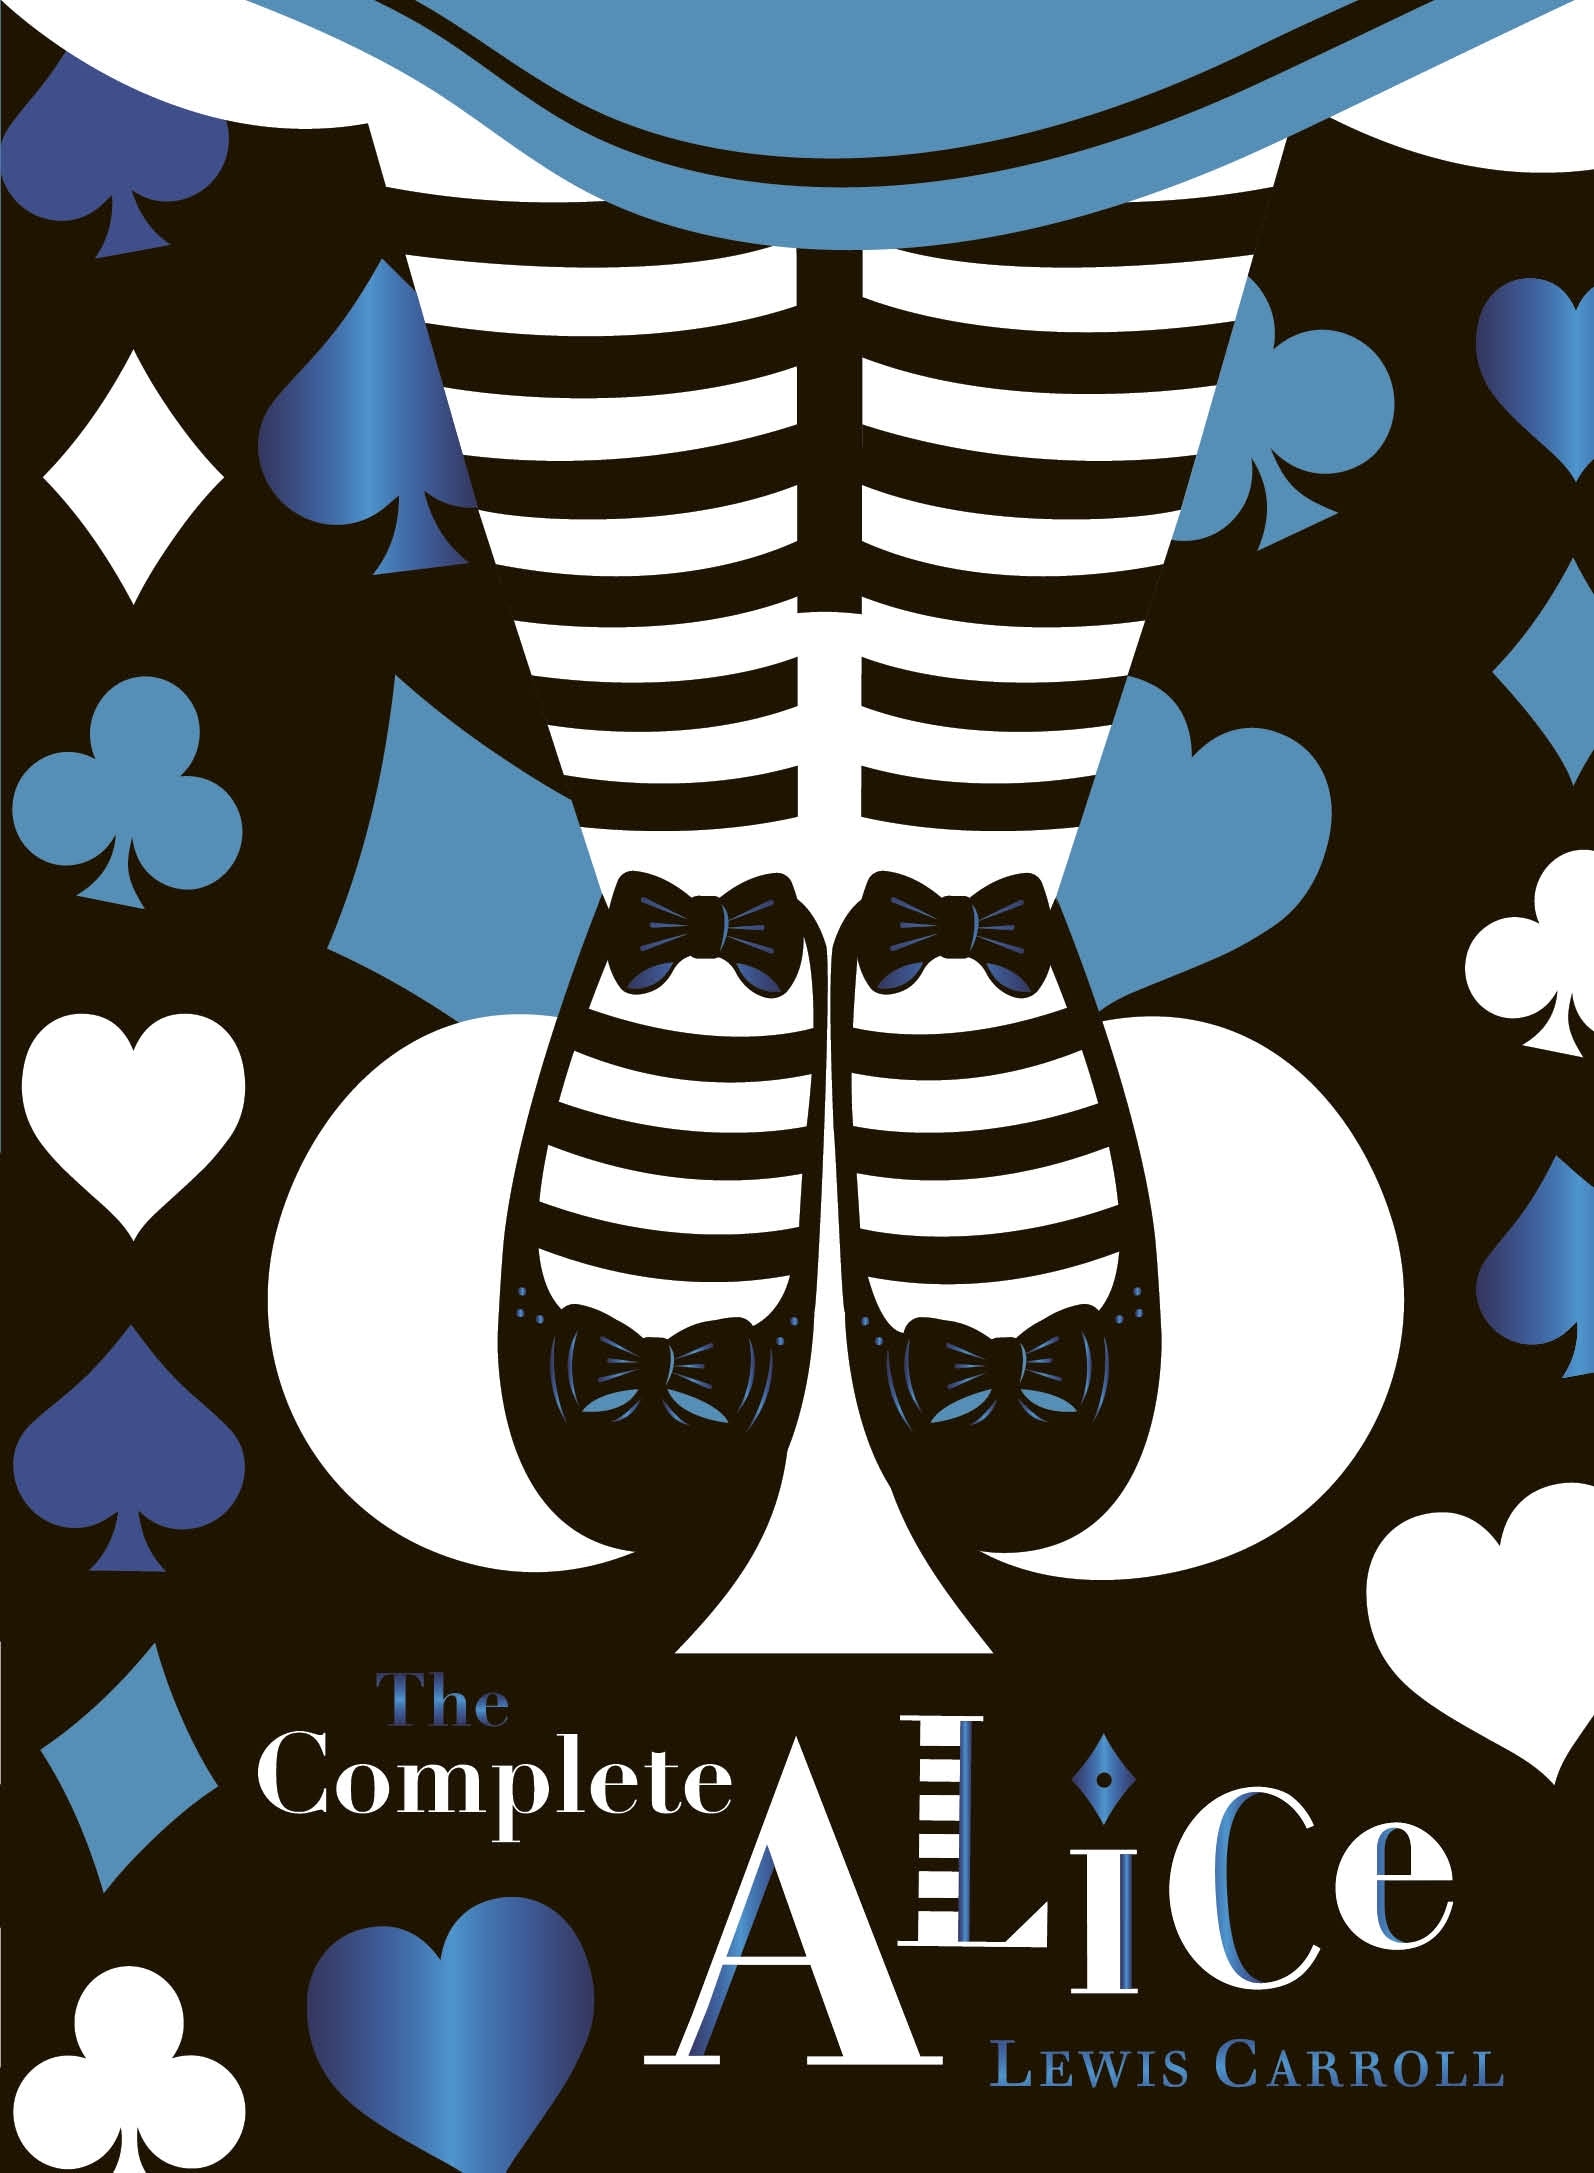 Book “The Complete Alice: V&A Collector's Edition” by Lewis Carroll — February 25, 2021